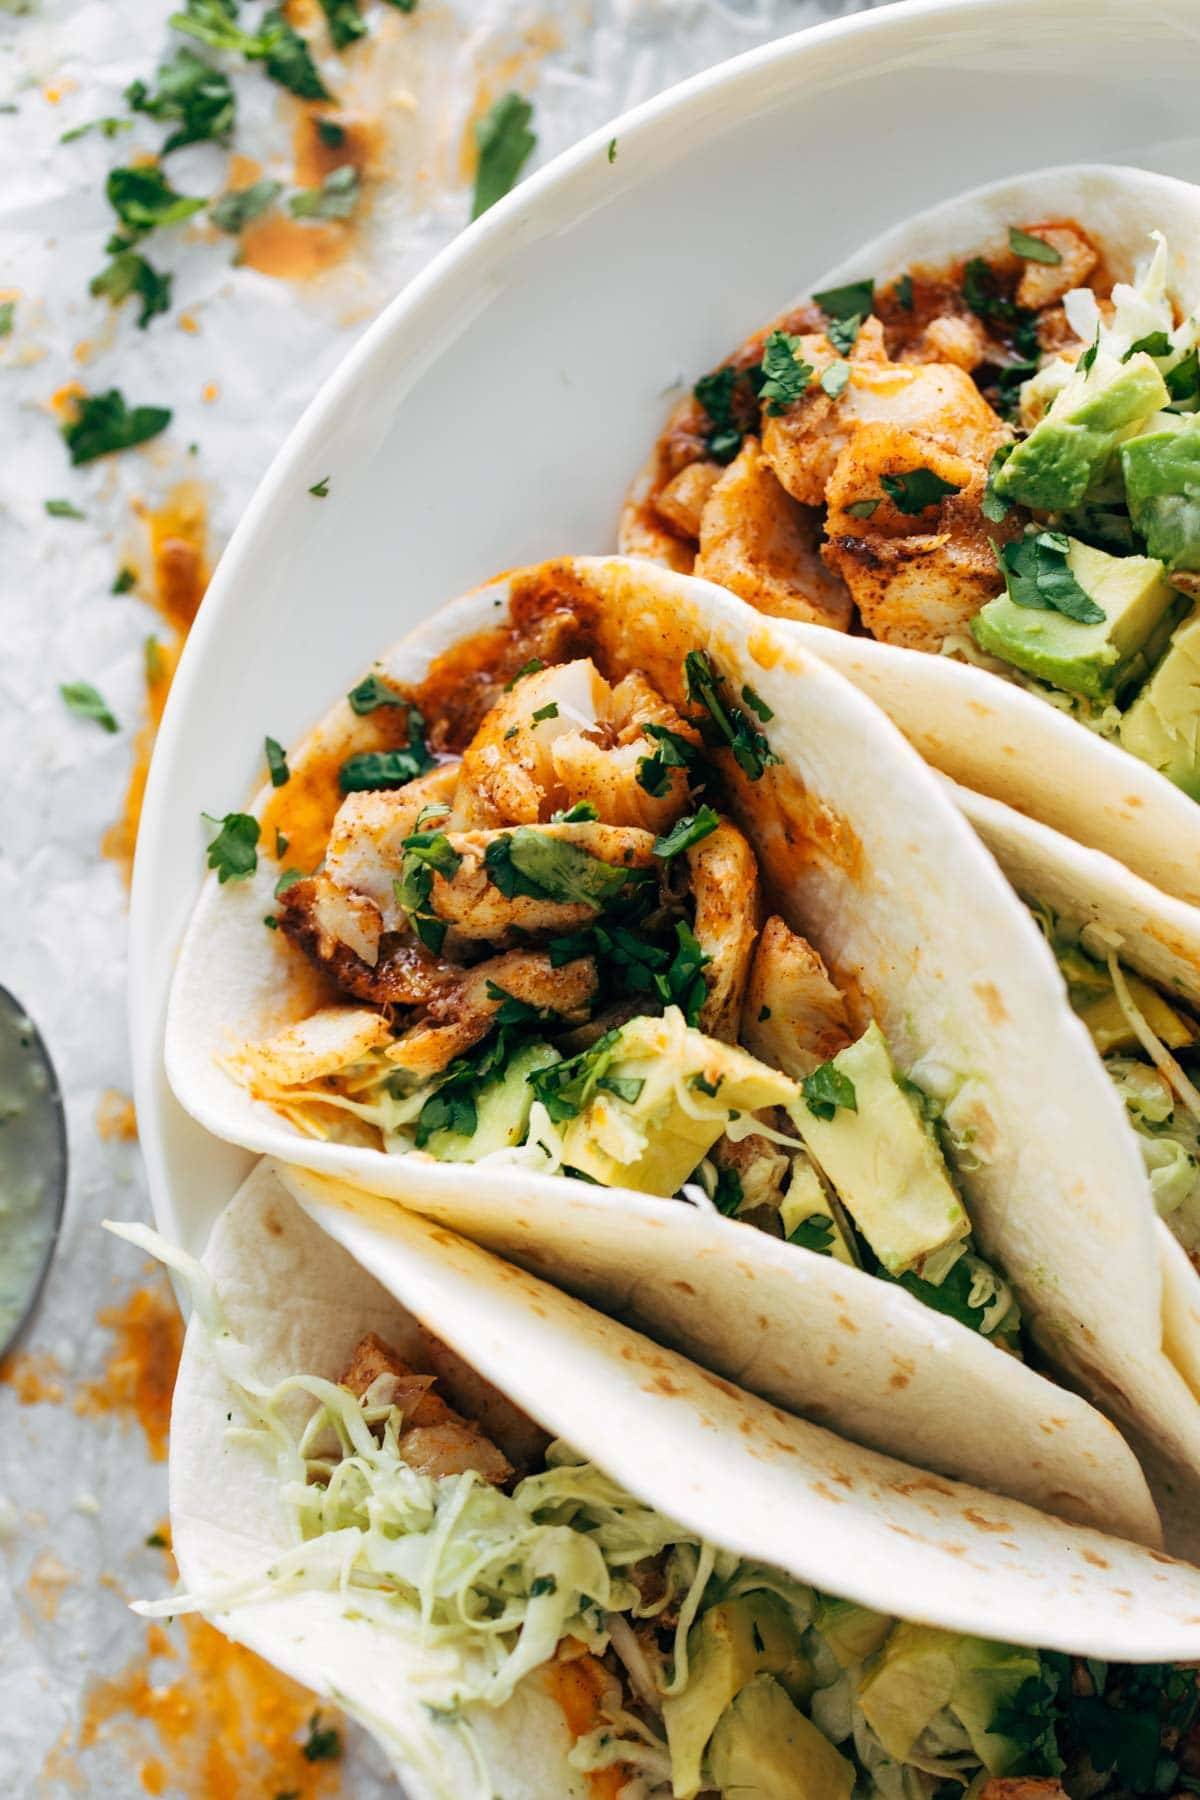 Tacos with fish and avocados.